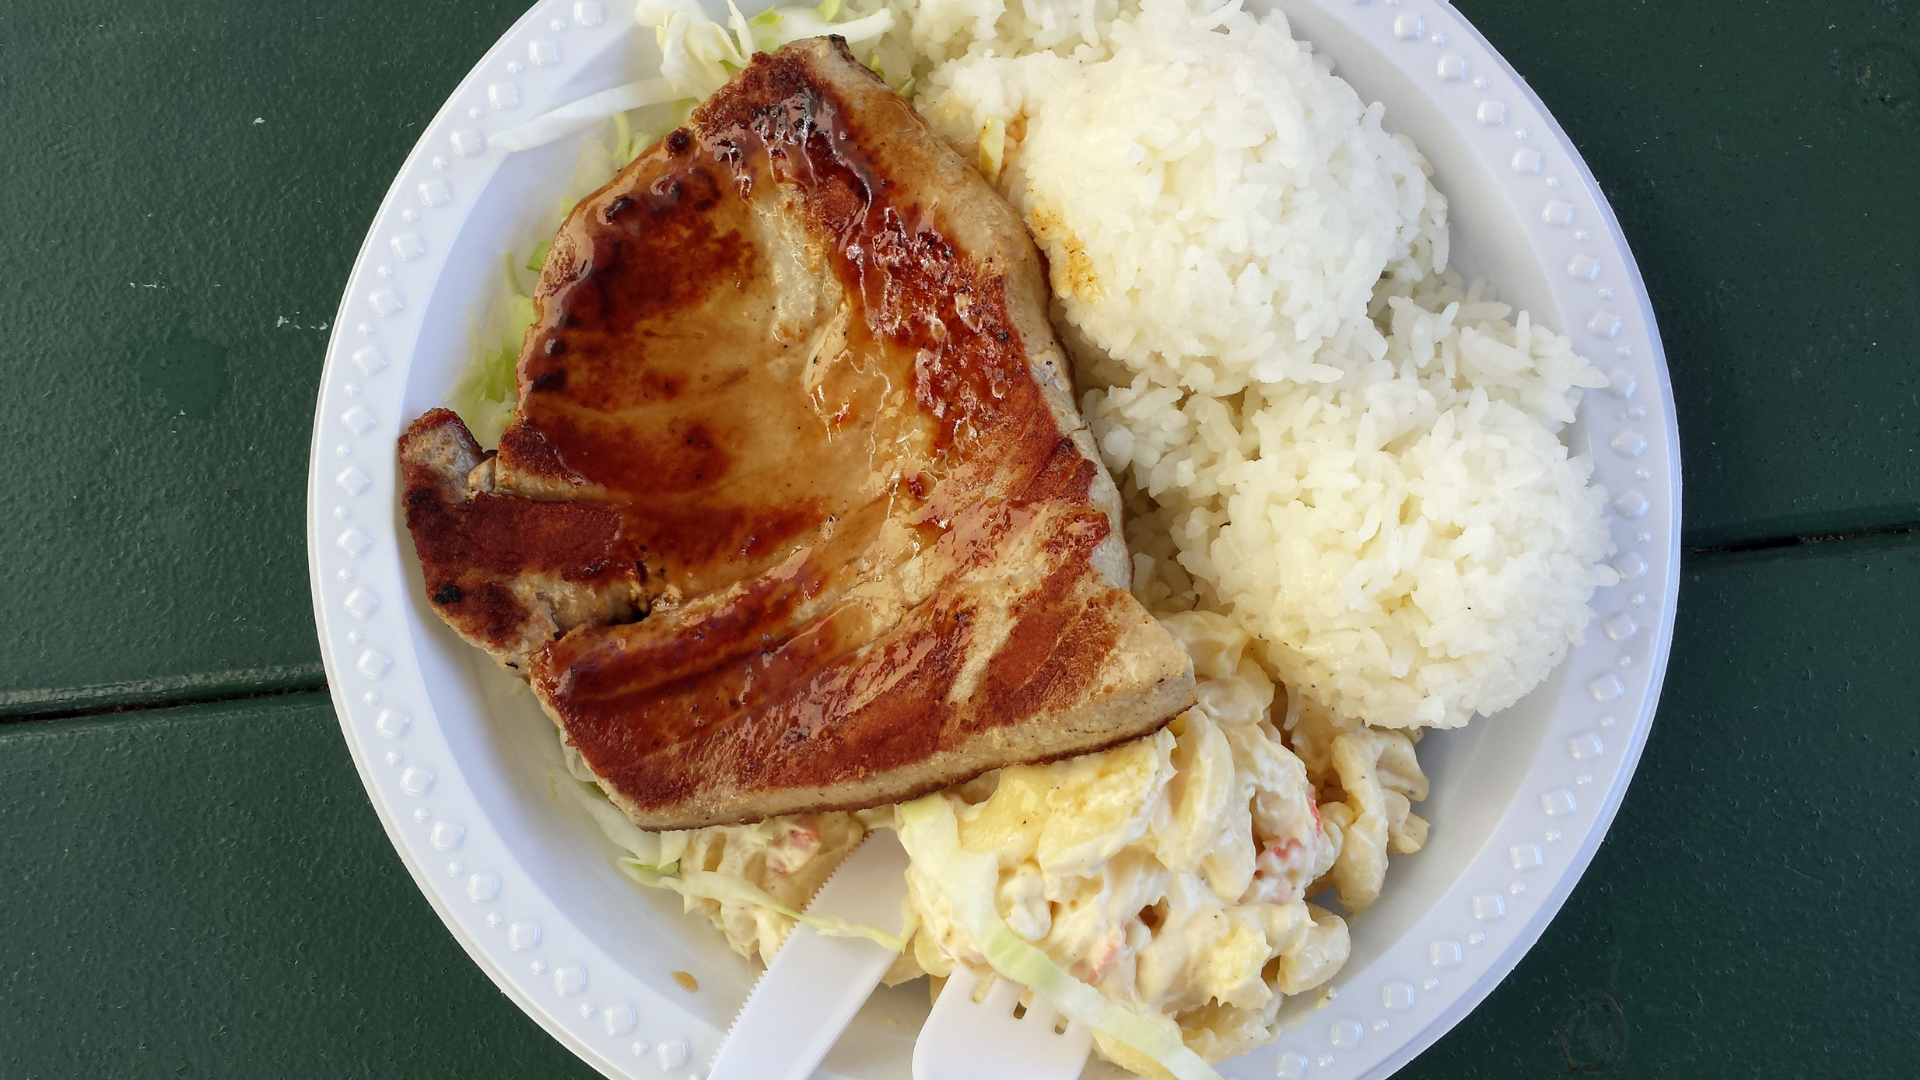 A local plate lunch with fish from Hawaiʻi